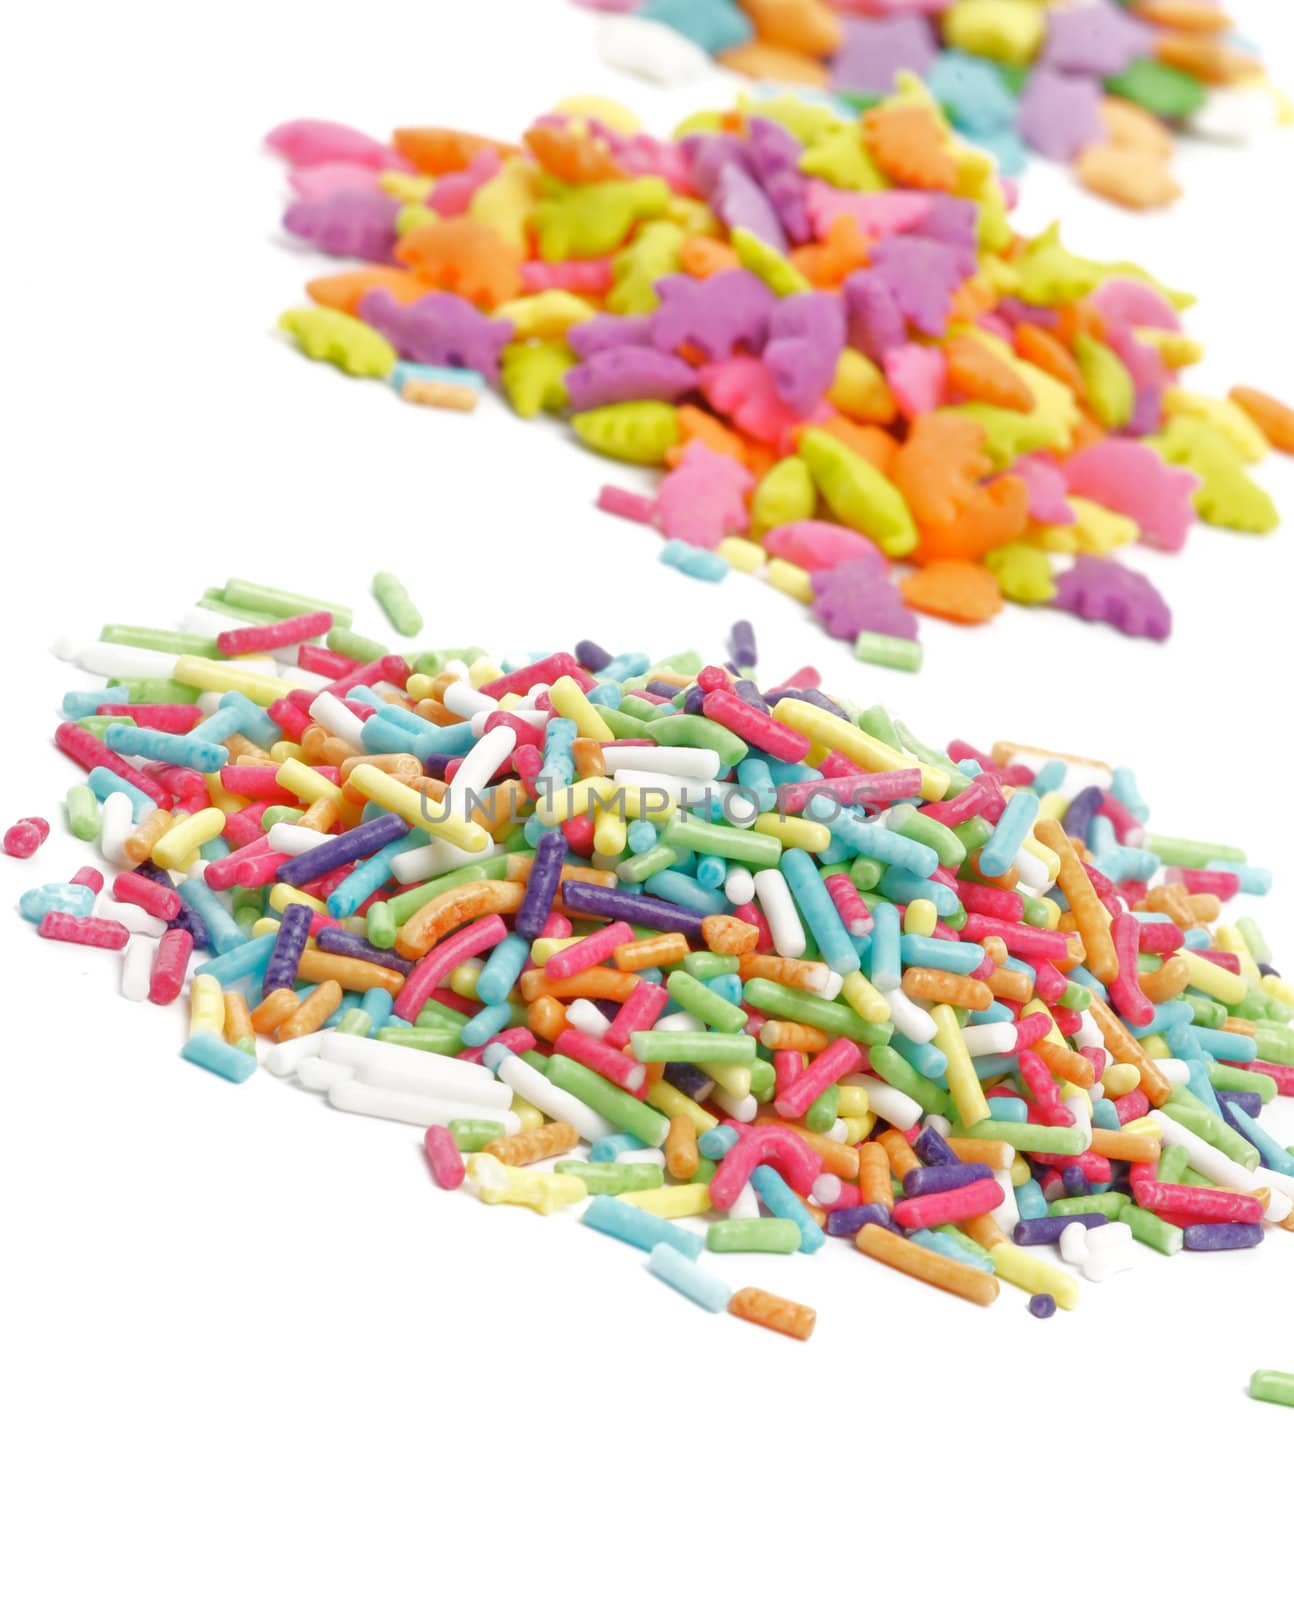 Heaps of Multi Colored Sprinkles "Jimmies" and Stars closeup on white background